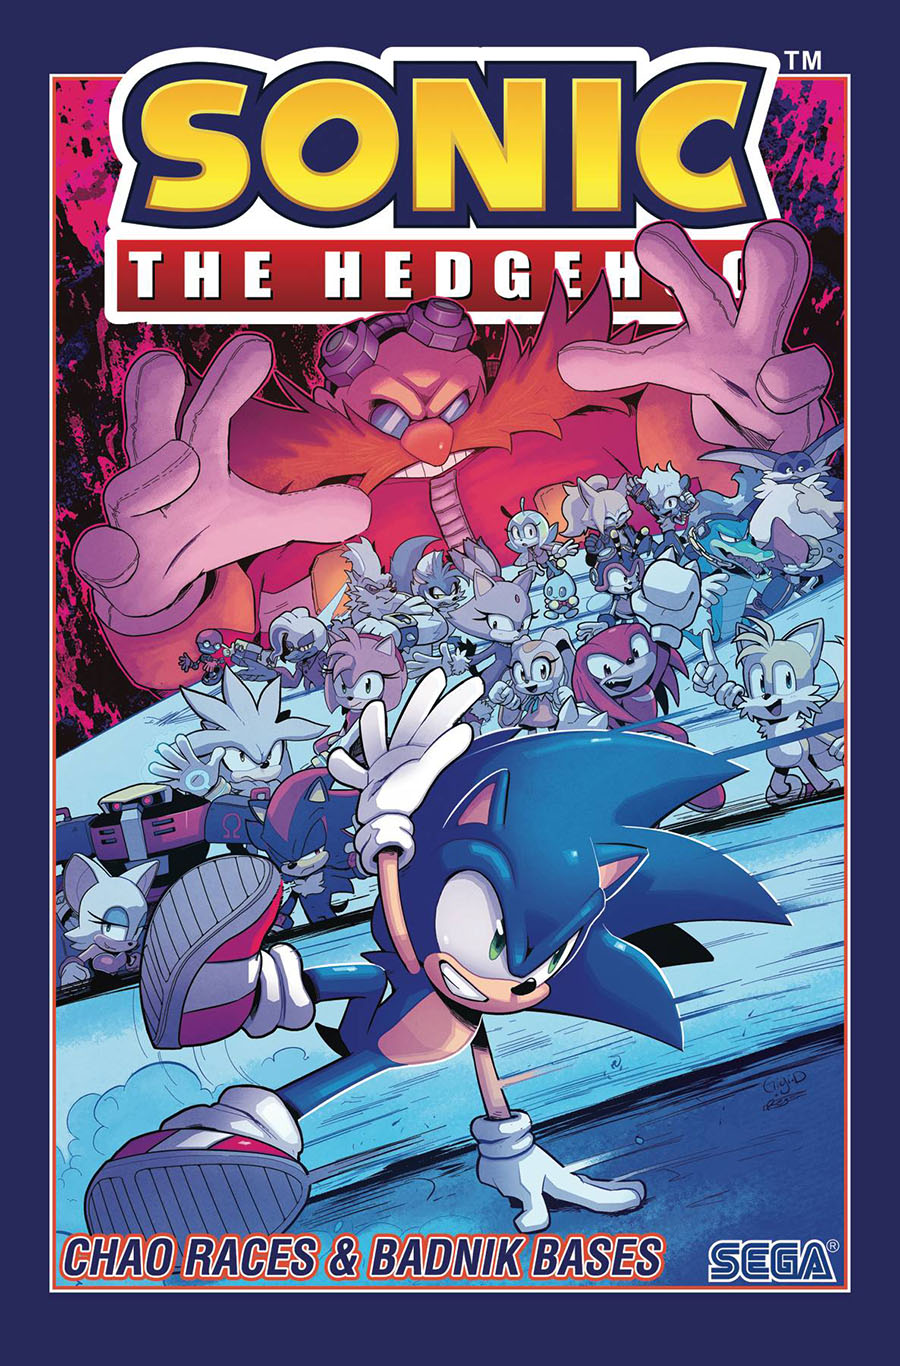 Sonic The Hedgehog (IDW) Vol 9 Chao Races & Badnik Bases TP